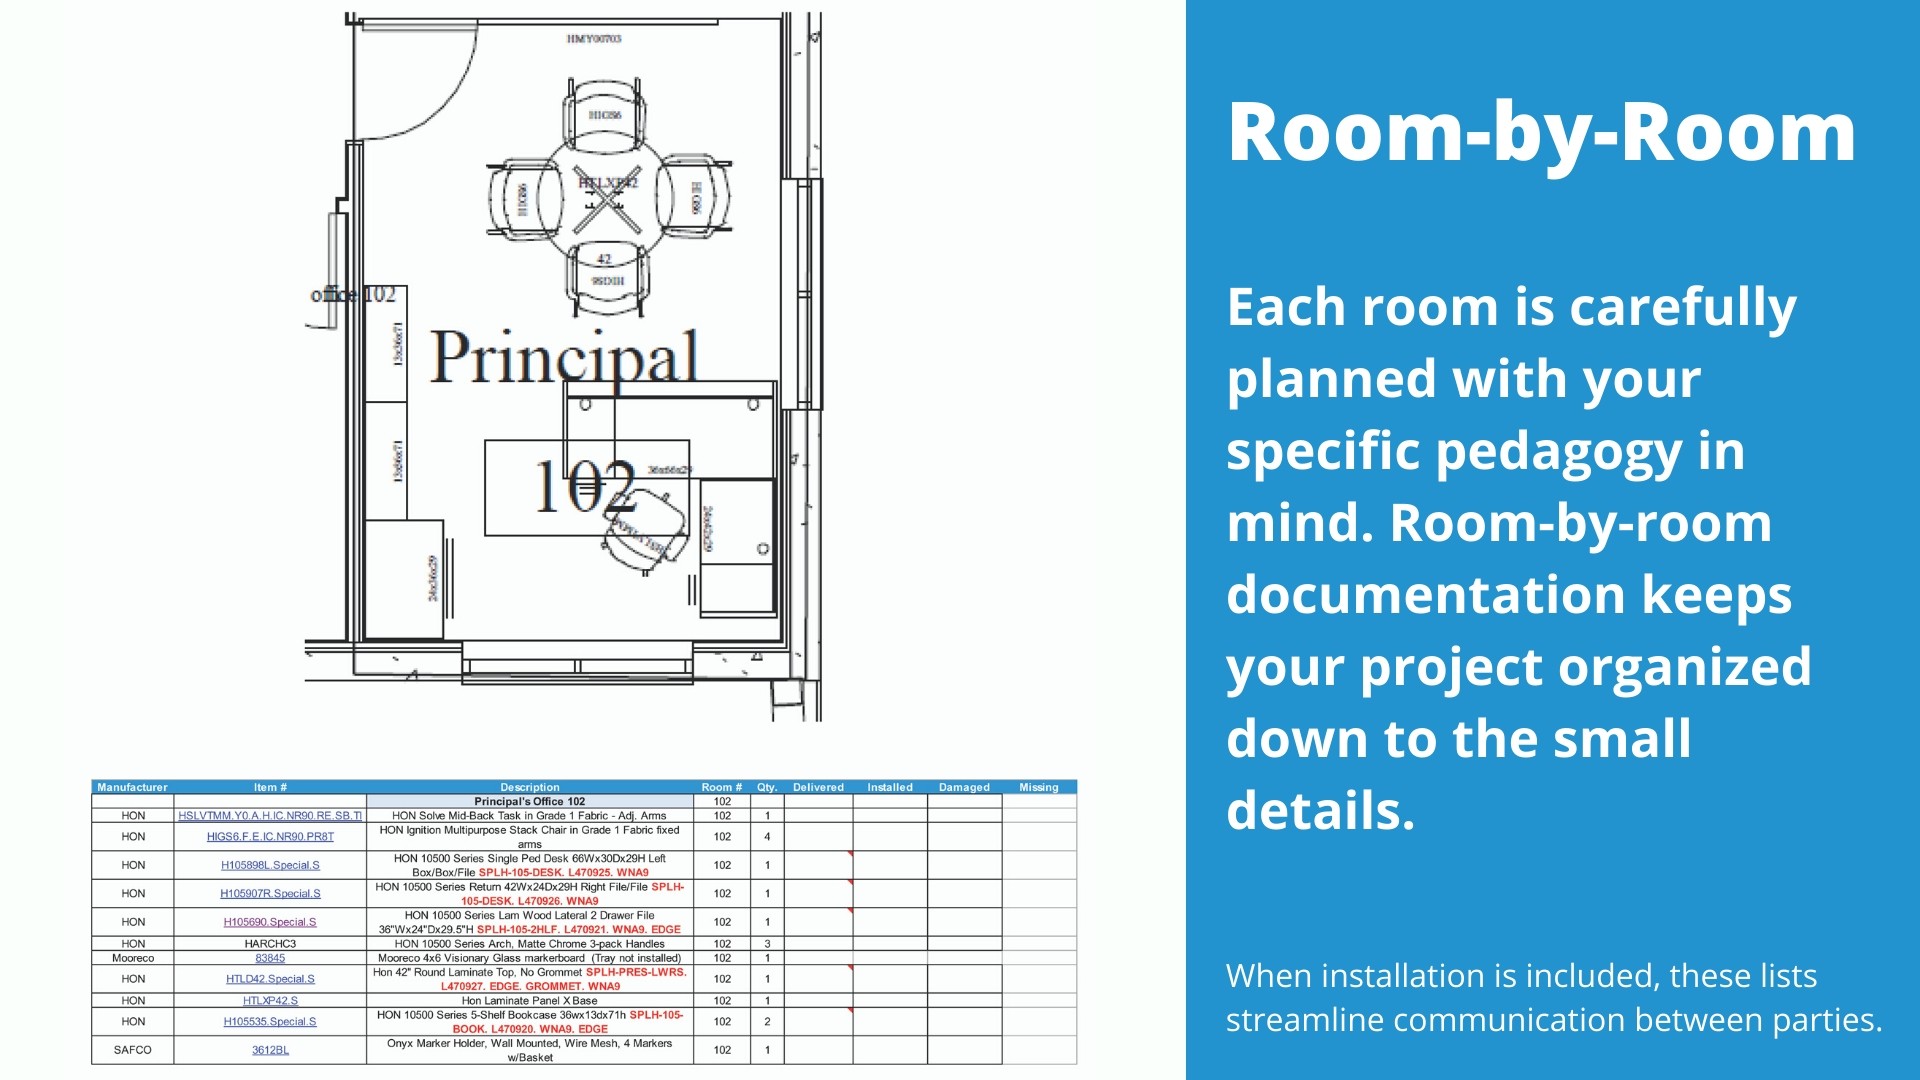 Each room in your school is carefully planned with your specific pedagogy in mind. Room by room documentation keeps your project organized down to the small details